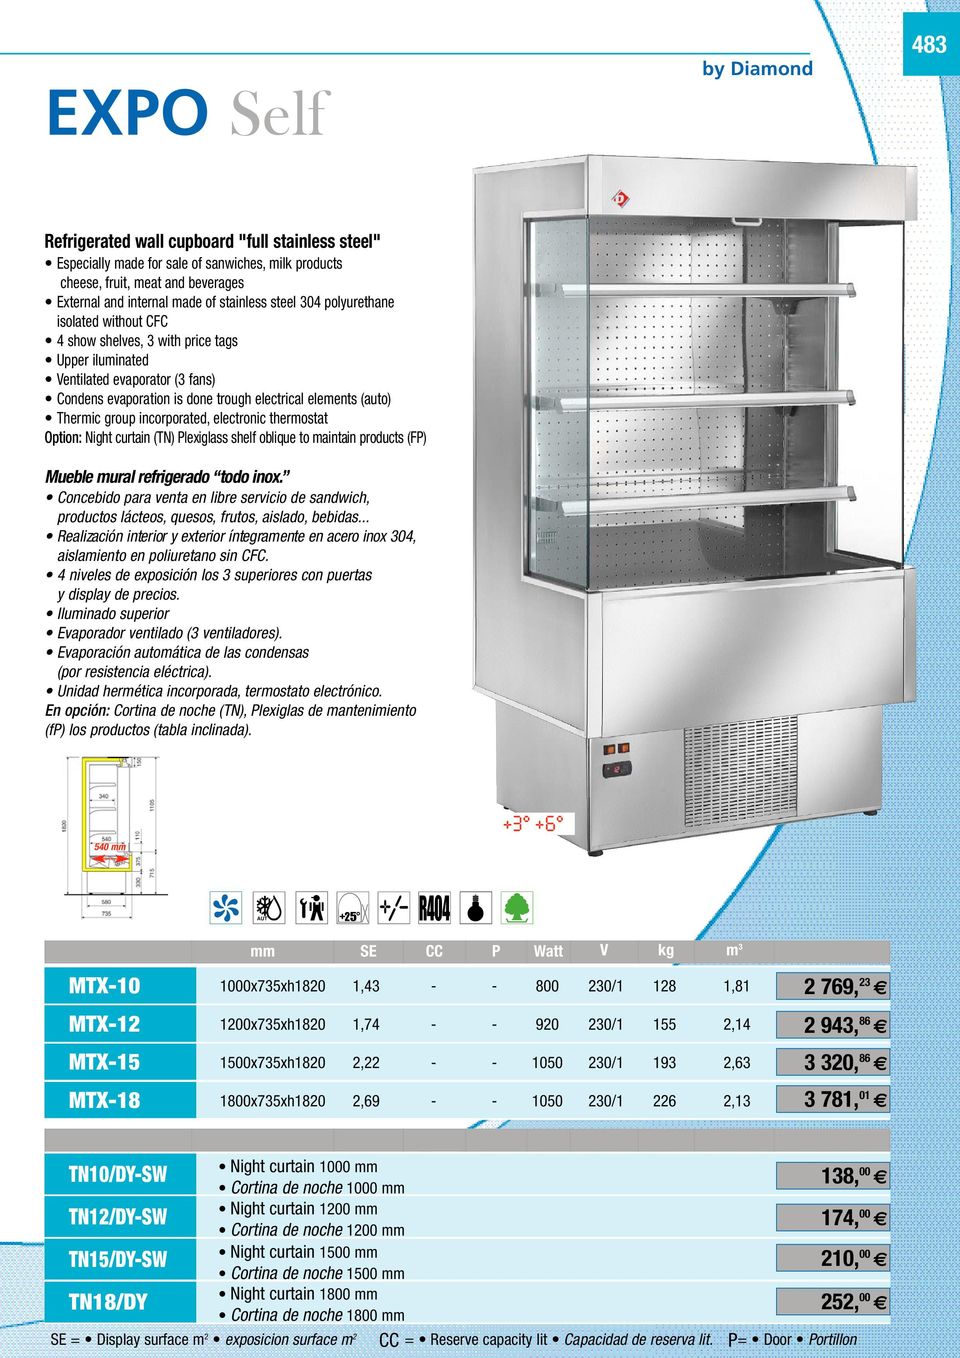 Thermic group incorporated, electronic thermostat O p t i o n : Night curtain (TN) Plexiglass shelf oblique to maintain products (FP) Mueble mural refrigerado todo inox.